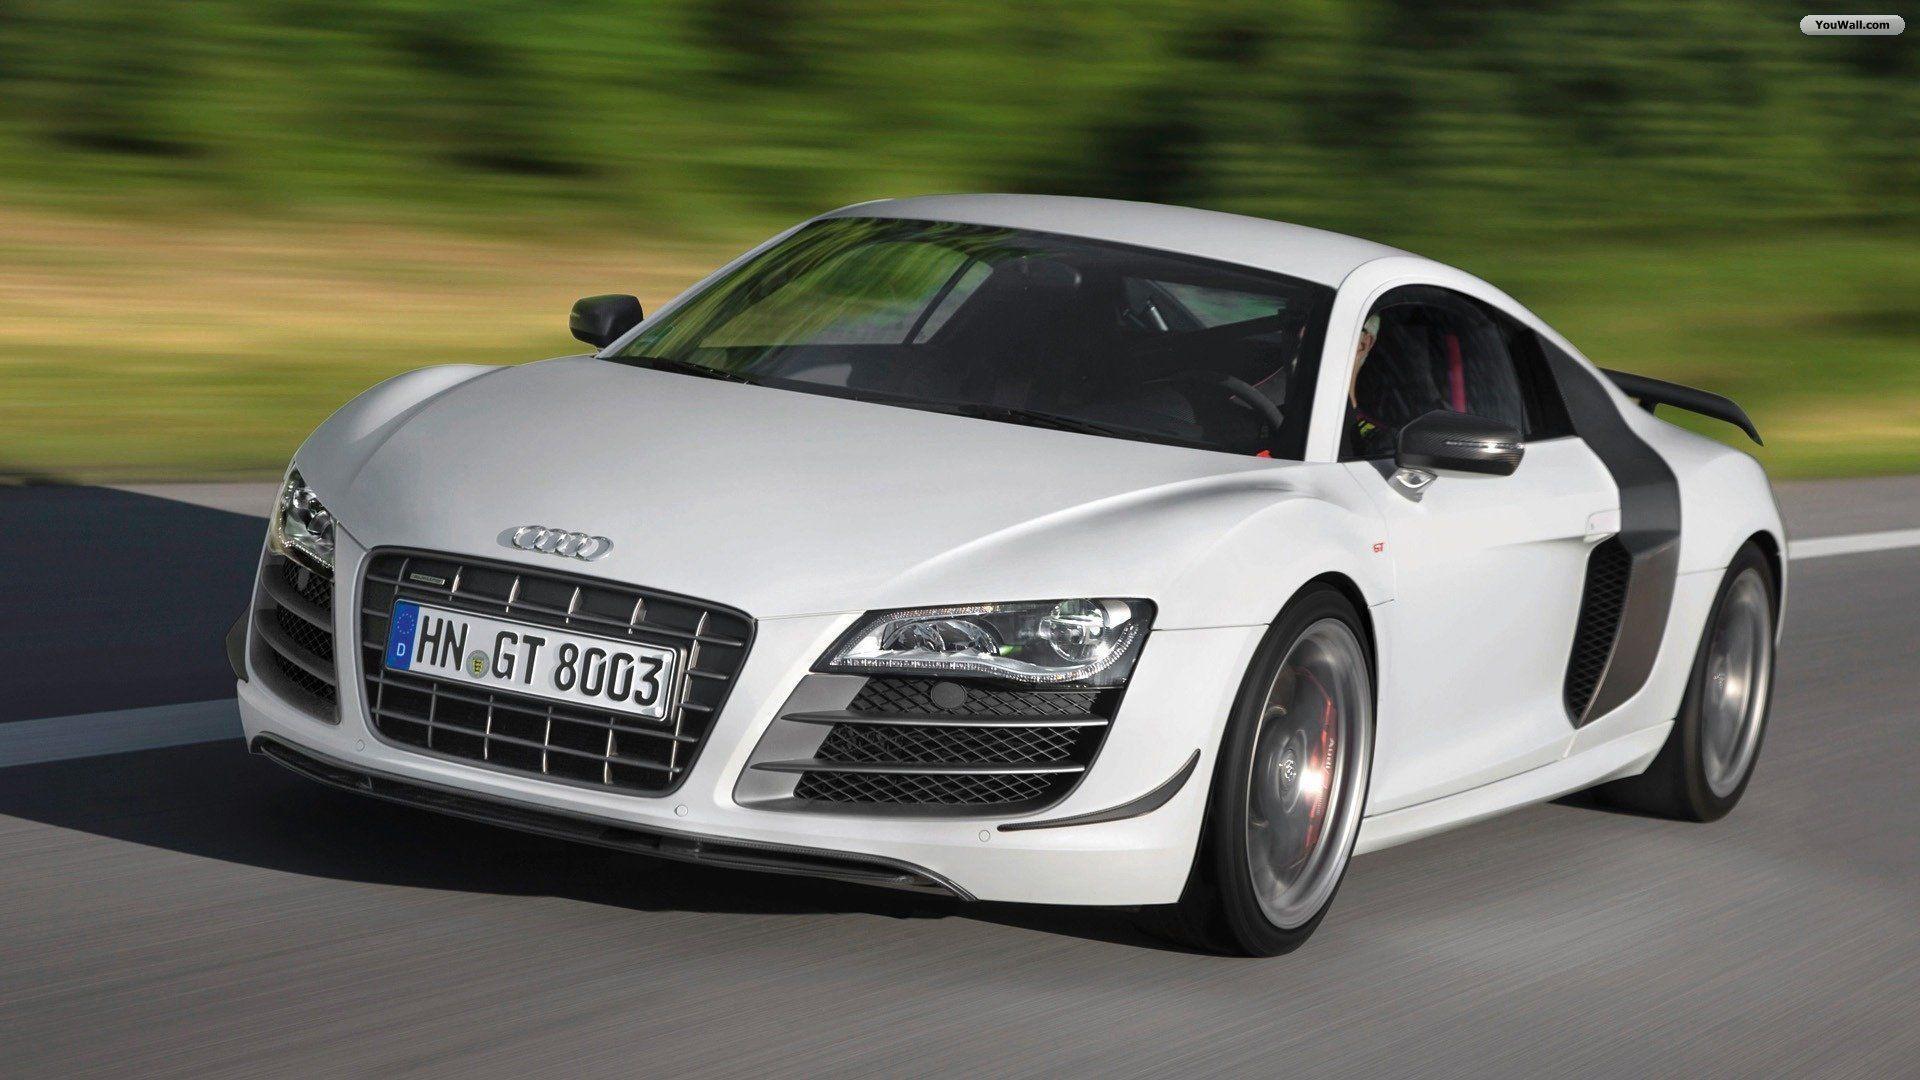 Audi R8 Gt Picture 2015 Lovers